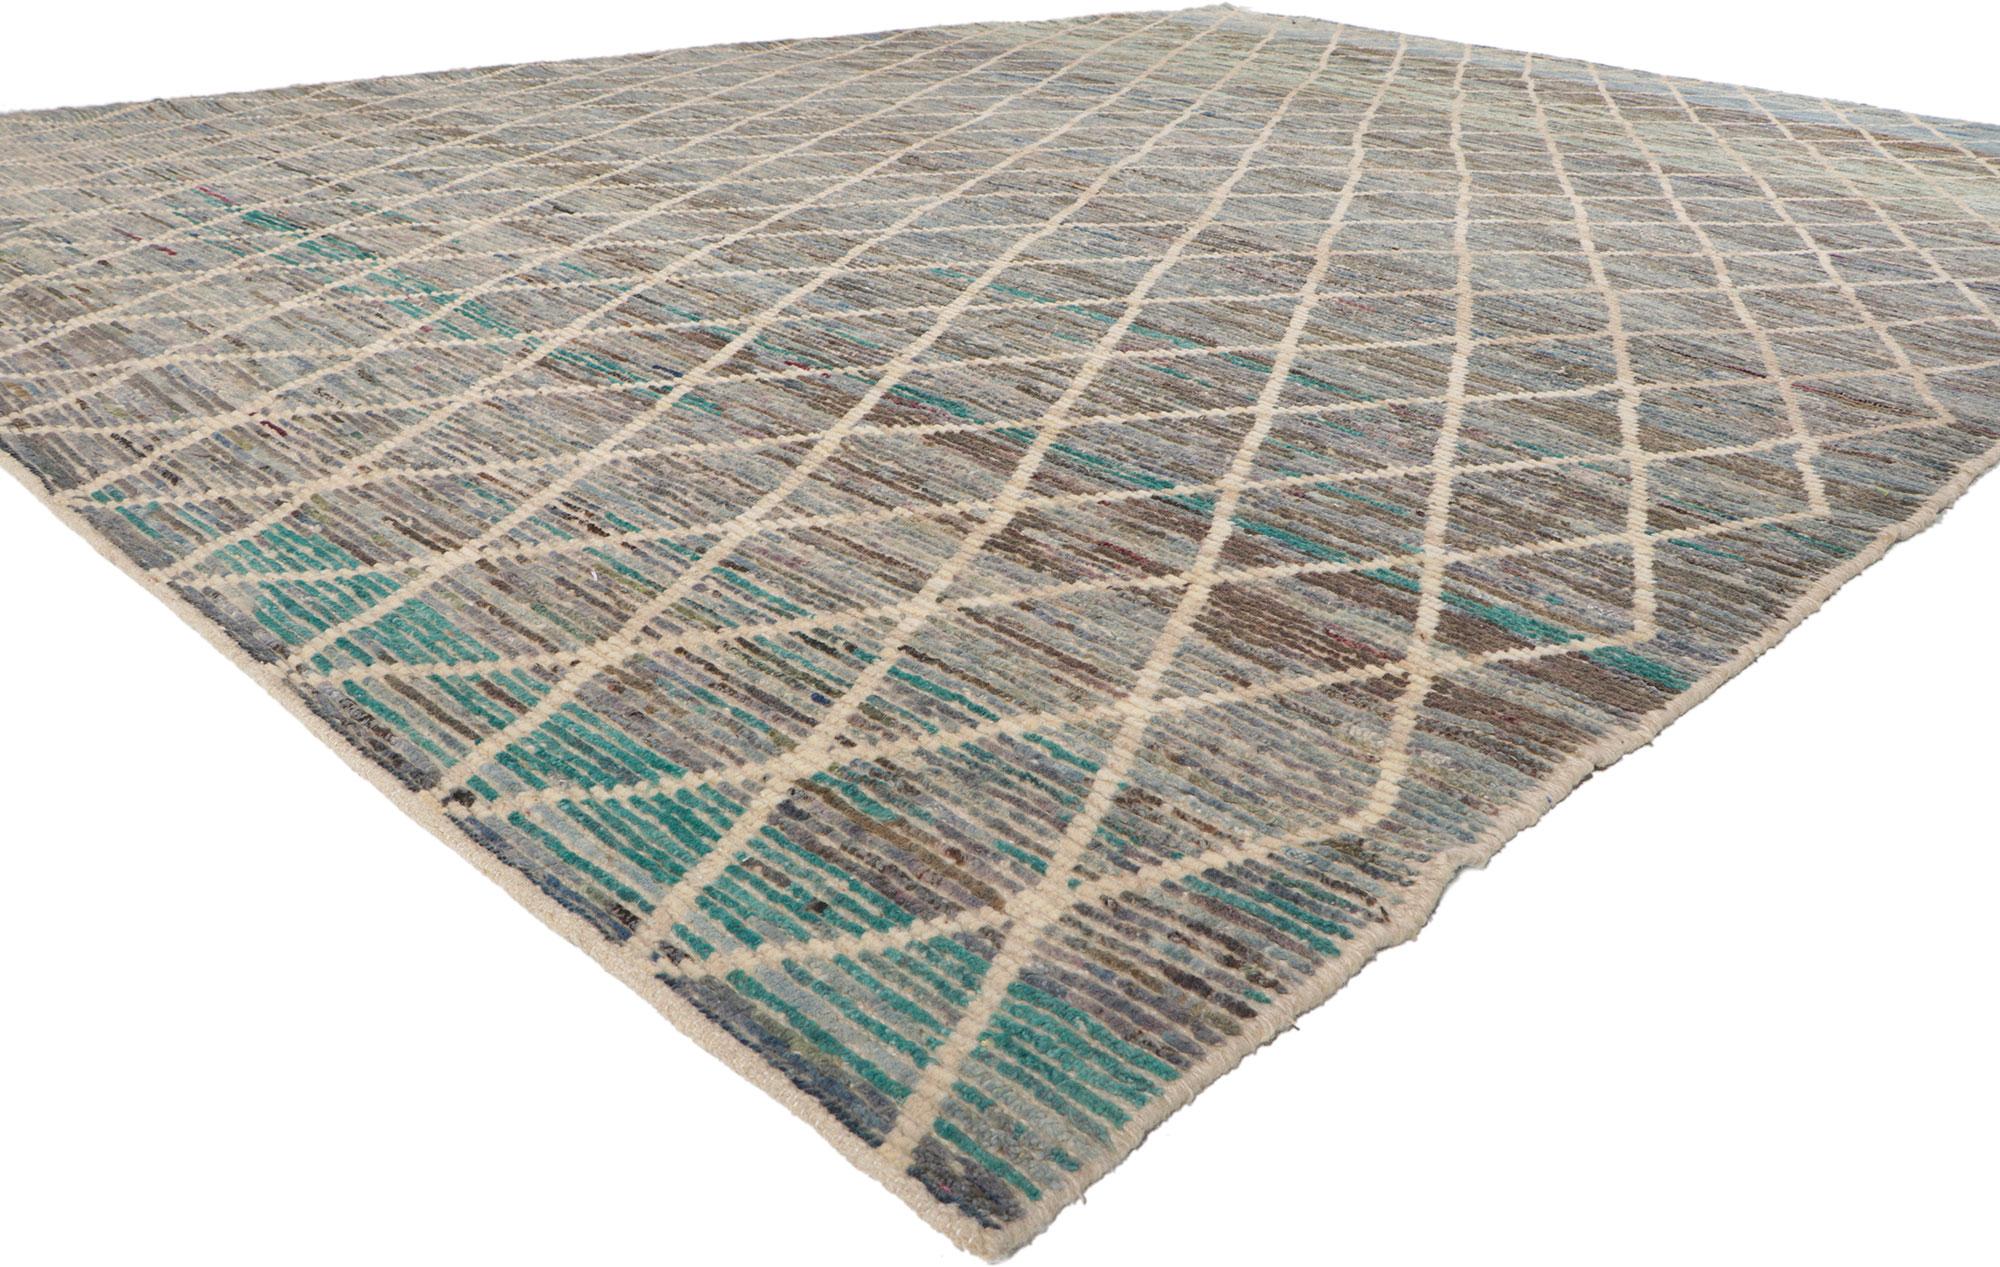 80813 Modern Earth-Tone Moroccan Rug, 10'02 x 13'03.
Emanating nomadic charm with incredible detail and texture, this hand knotted wool Moroccan rug will take on a curated lived-in look that feels timeless while imparting a sense of warmth and